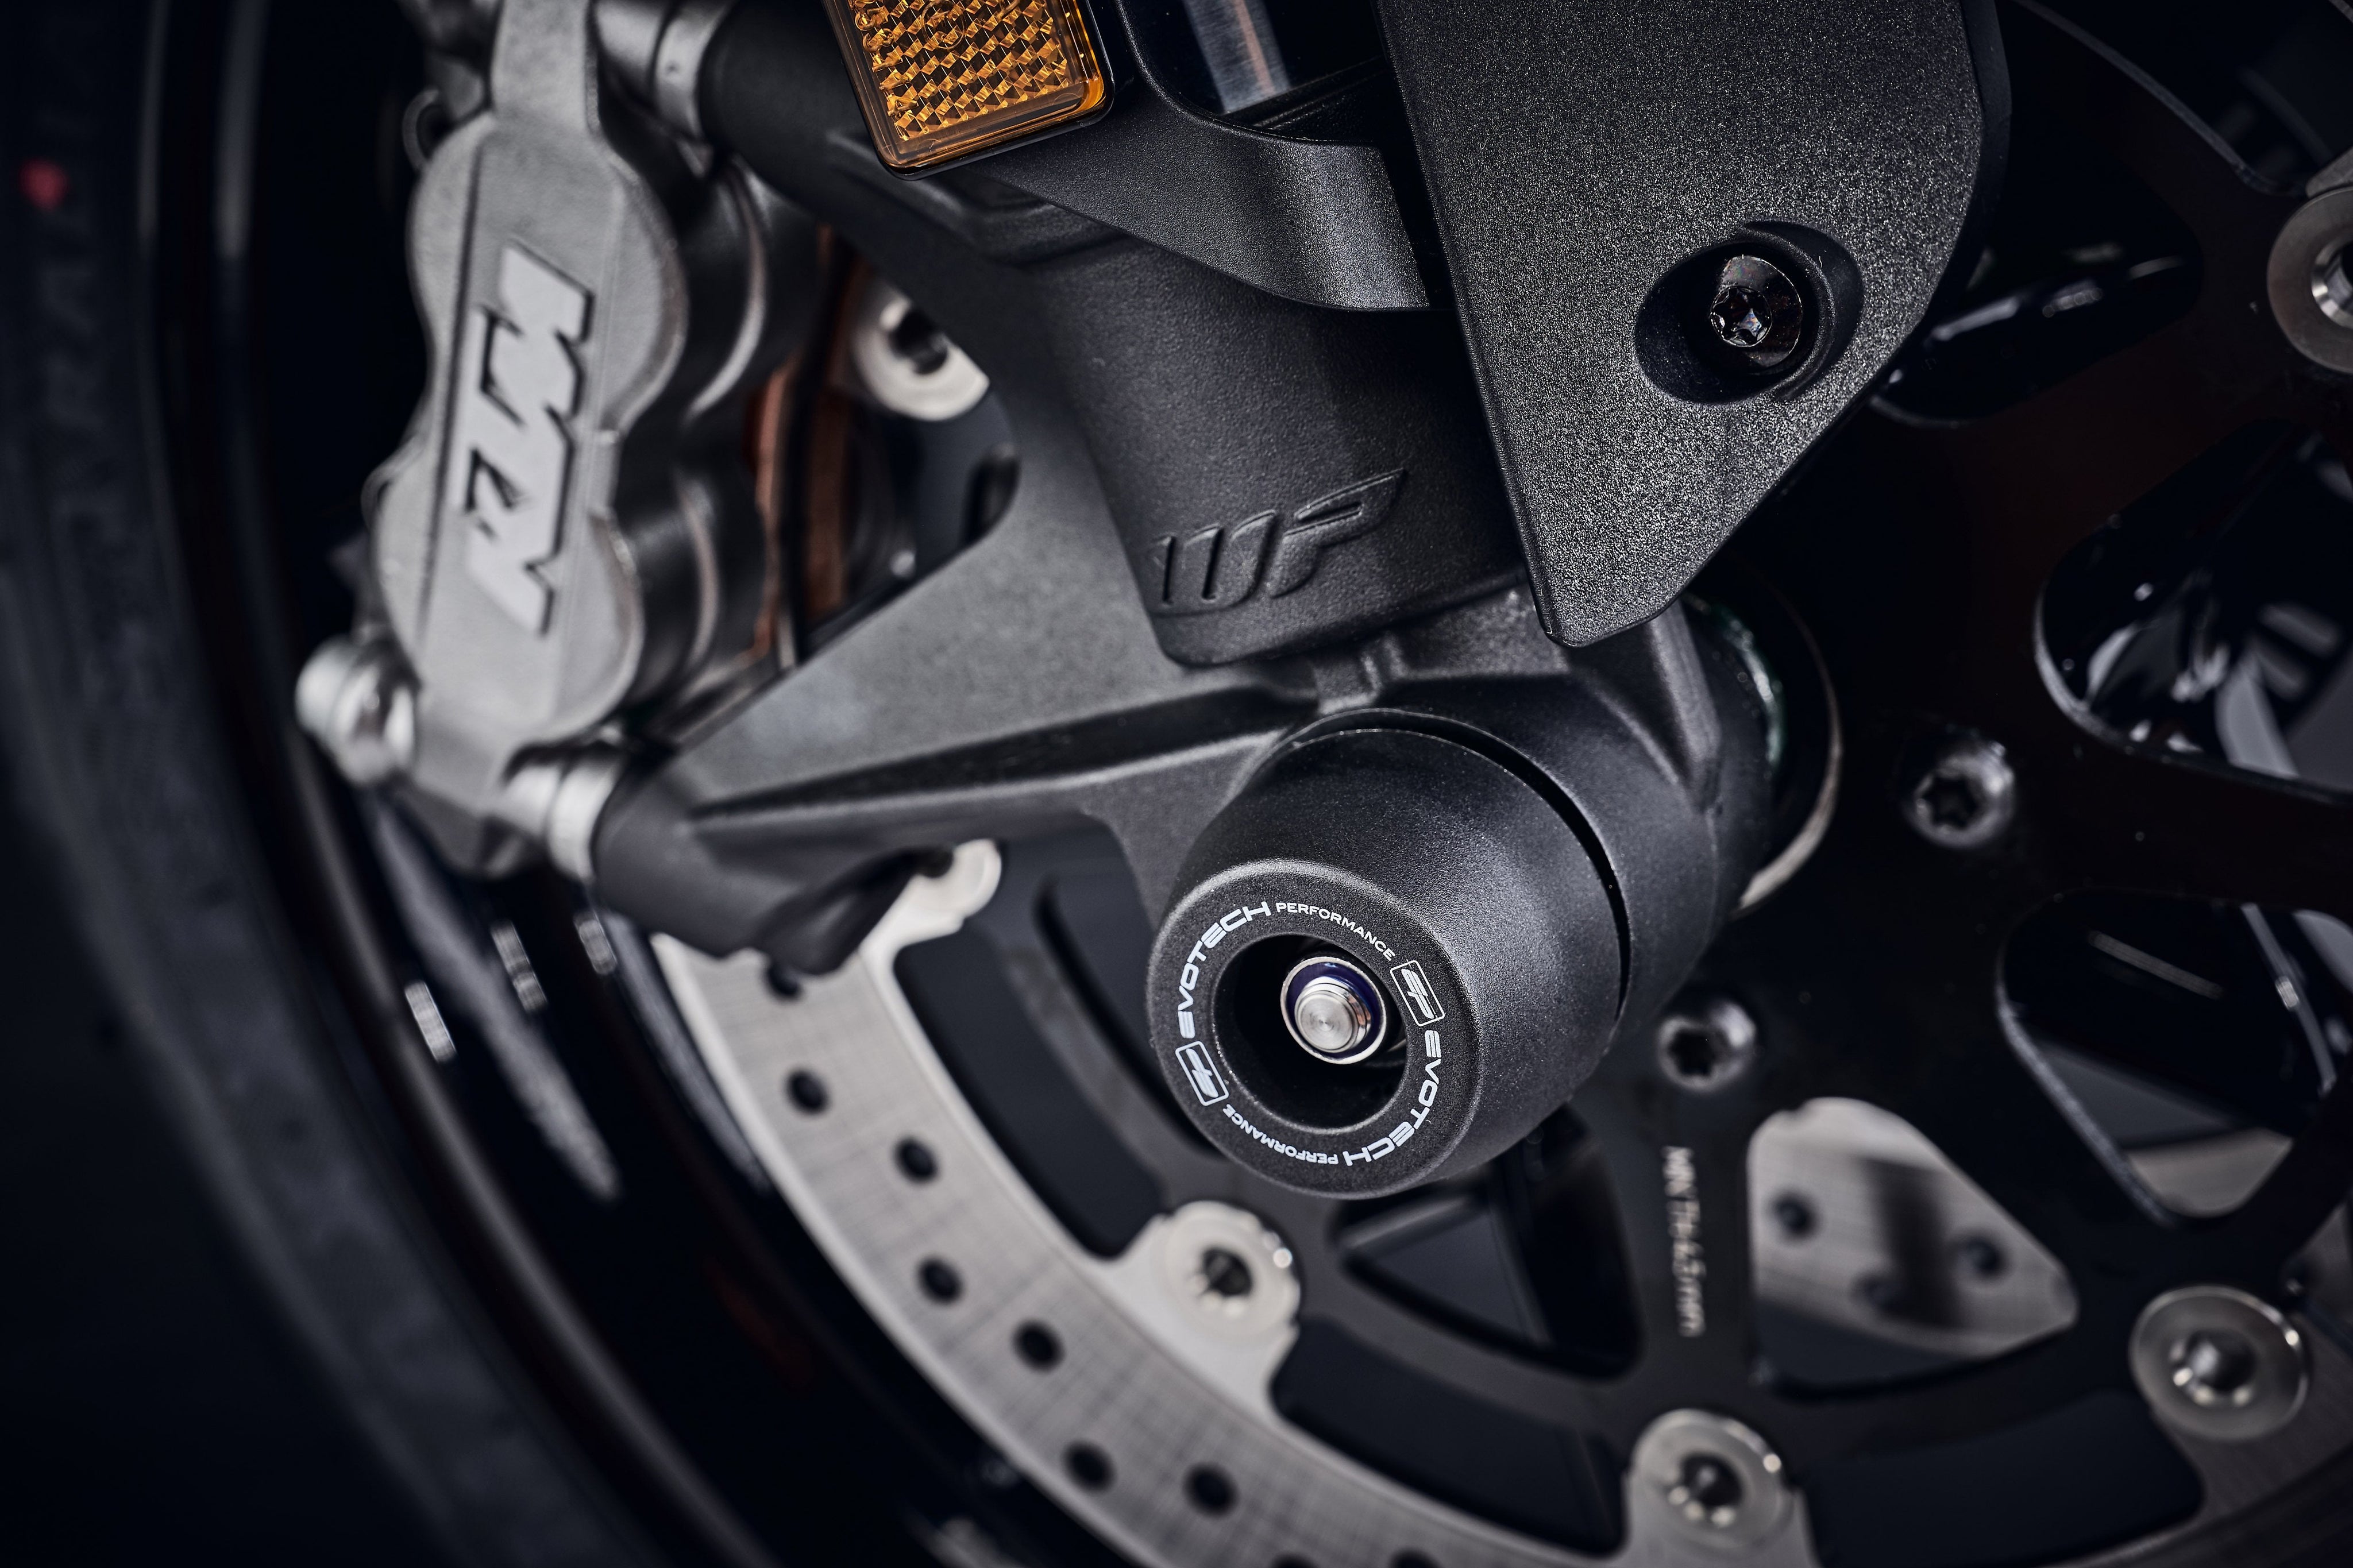 EP Front Spindle Bobbins fitted seamlessly to the KTM 1290 Super Duke R, extending from the front forks for superior crash protection.